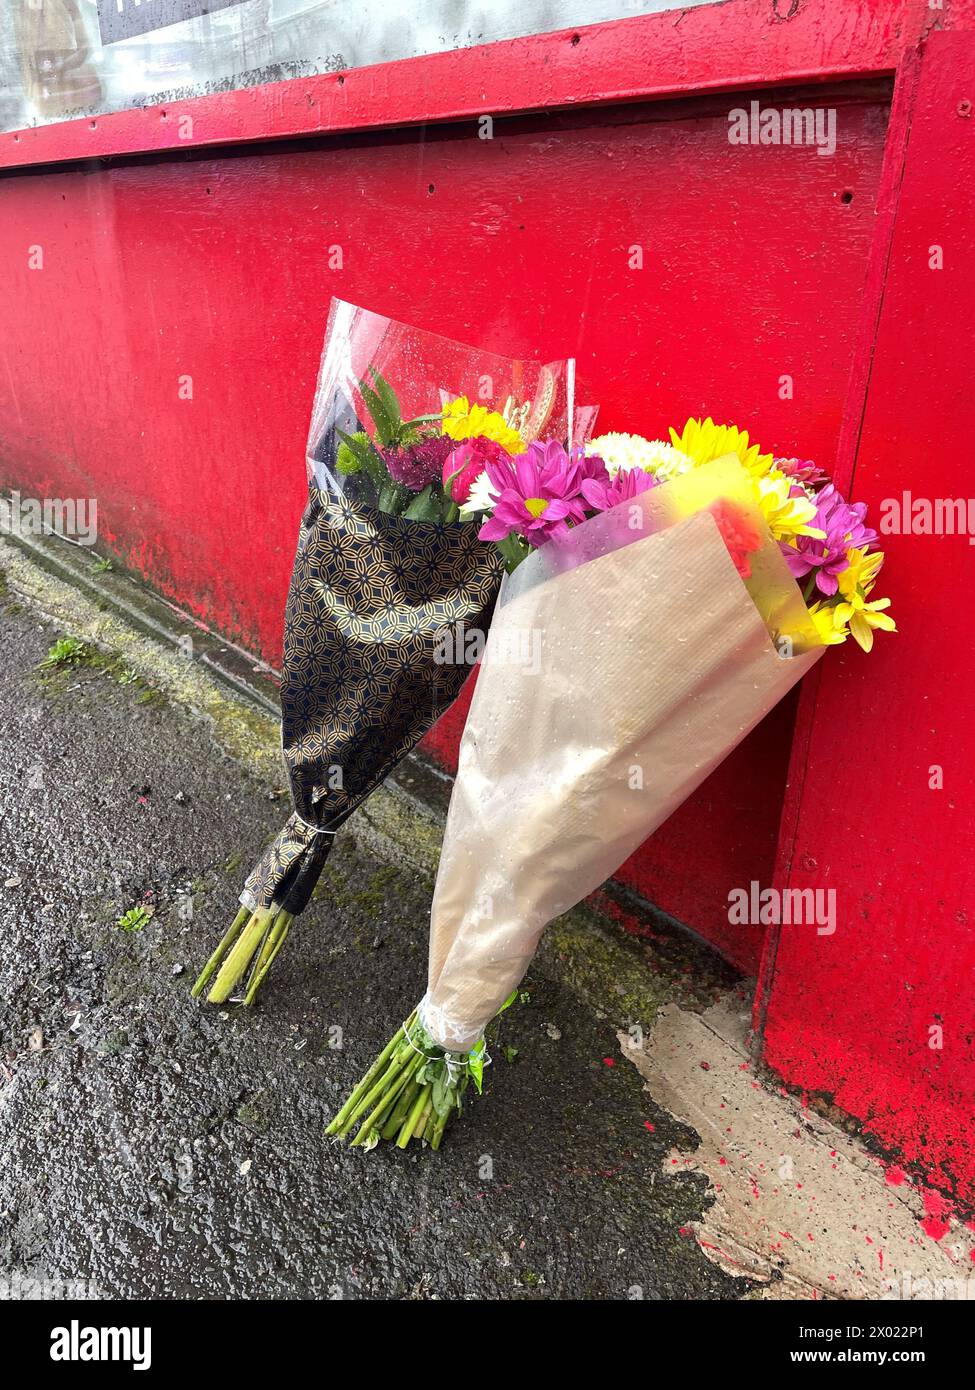 Floral tributes left in Bradford city centre after a 25-year-old man was arrested on suspicion of the murder of 27-year-old Kulsuma Akter, who was stabbed to death in the street as she pushed her baby in a pram on Saturday afternoon. The PA news agency understands the man arrested is Habibur Masum, who has been the subject of police appeals since Saturday. Picture date: Tuesday April 9, 2024. Stock Photo